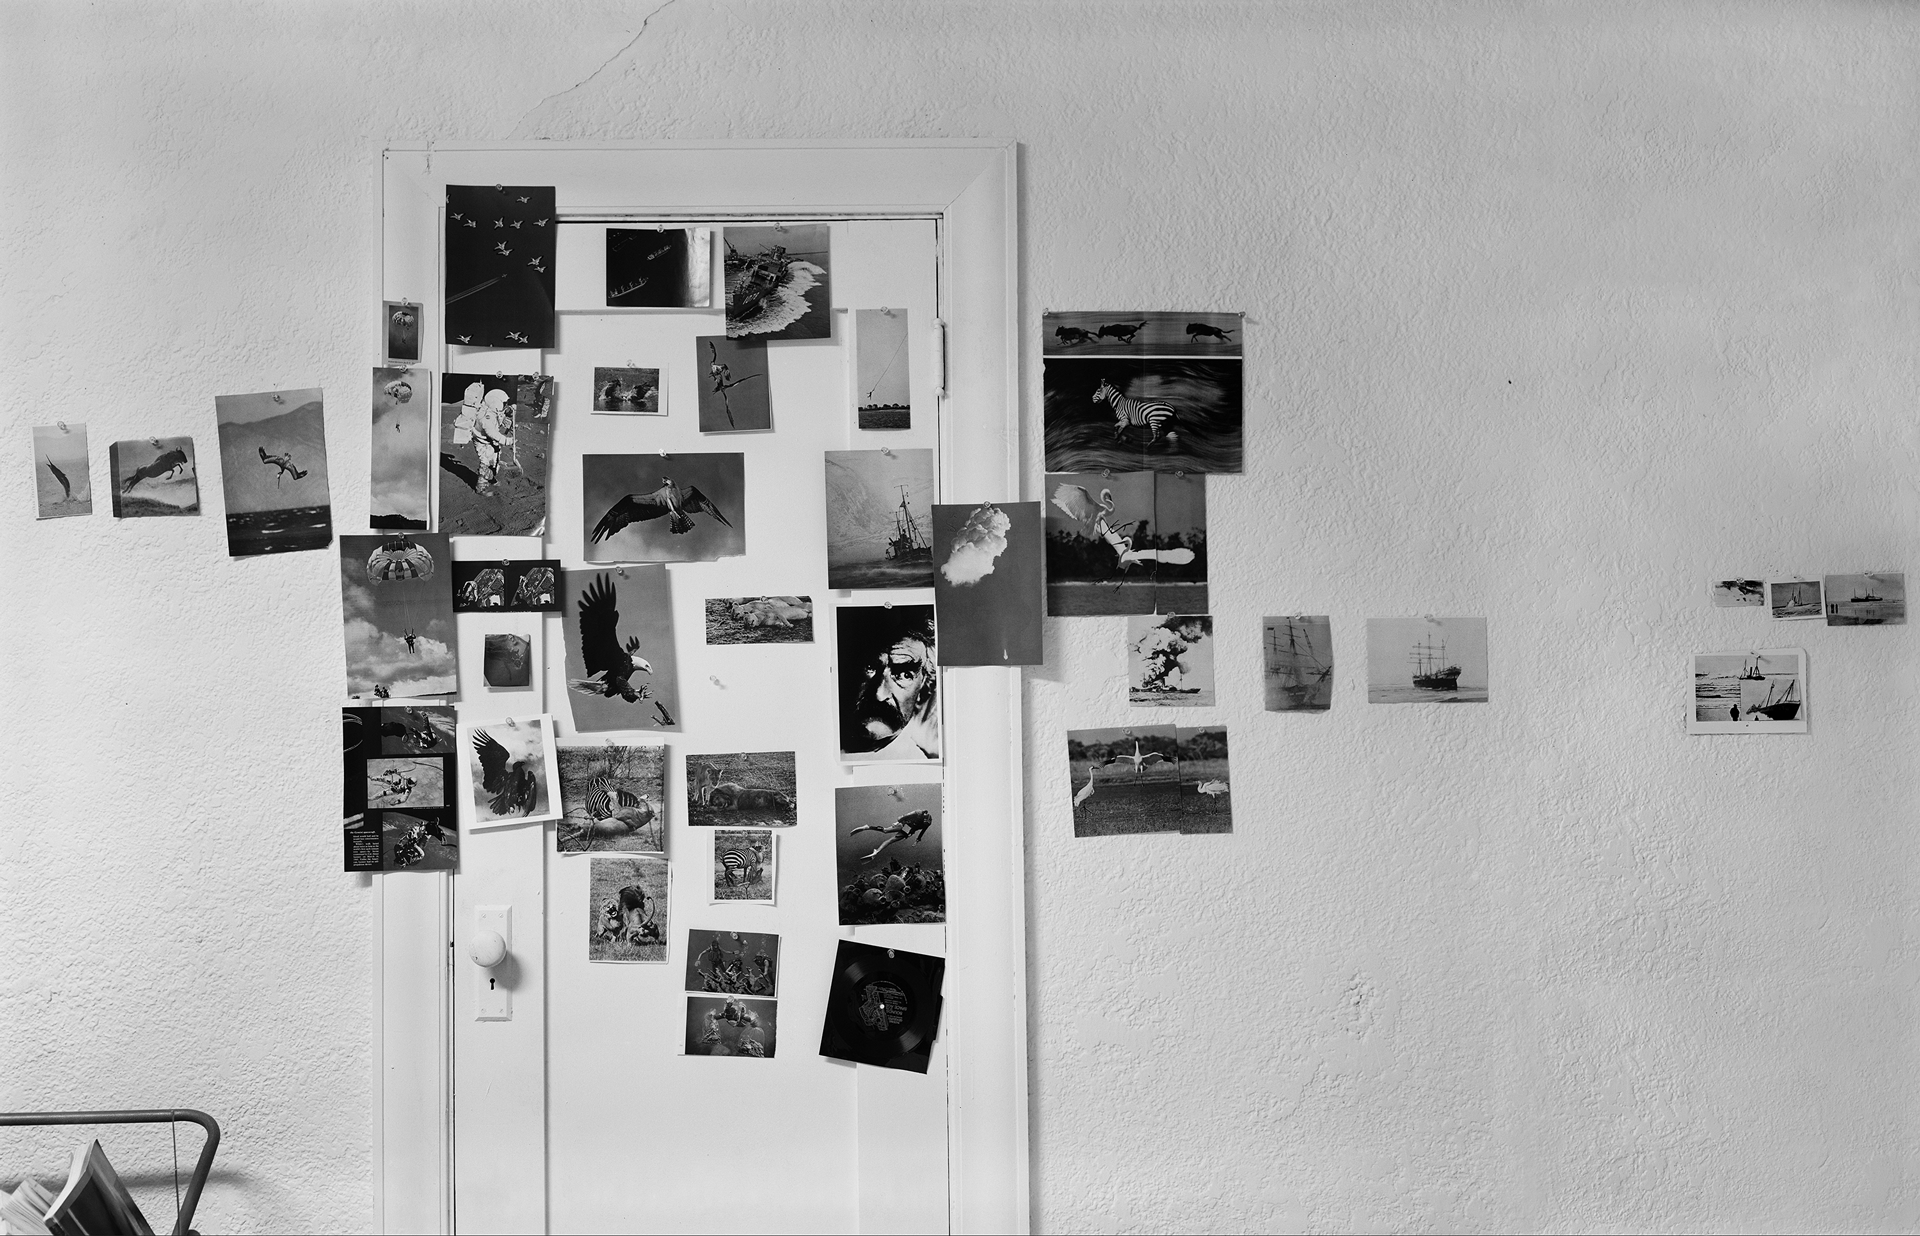 A photograph by James Welling, titled Jack Goldstein's Studio Wall, dated 1977.